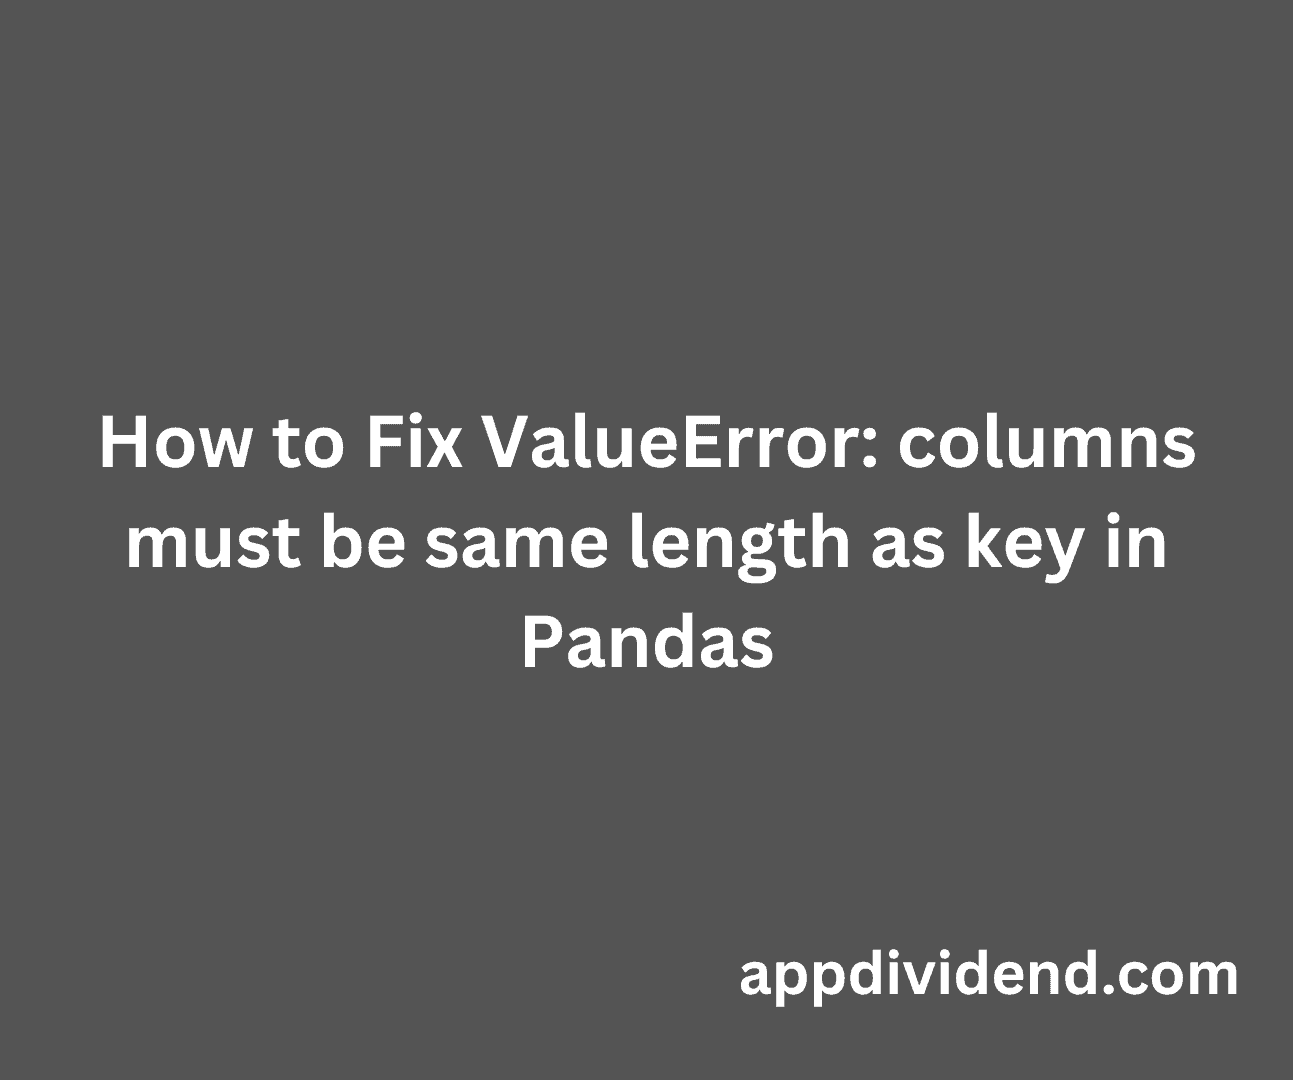 How to Fix ValueError - columns must be same length as key in Pandas